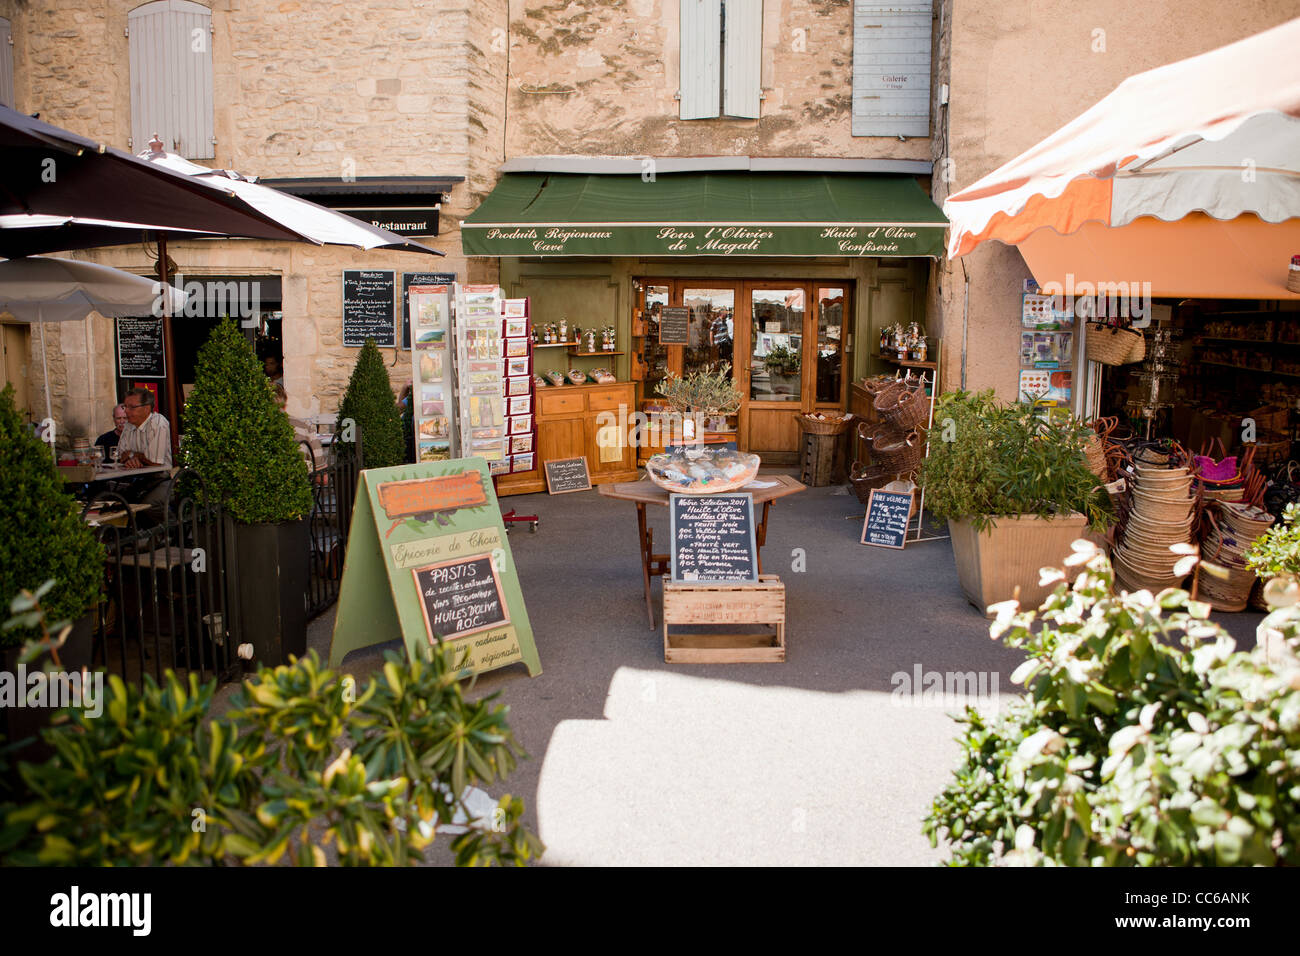 A row of restaurants, cafes, and shops in Gordes, France Stock Photo